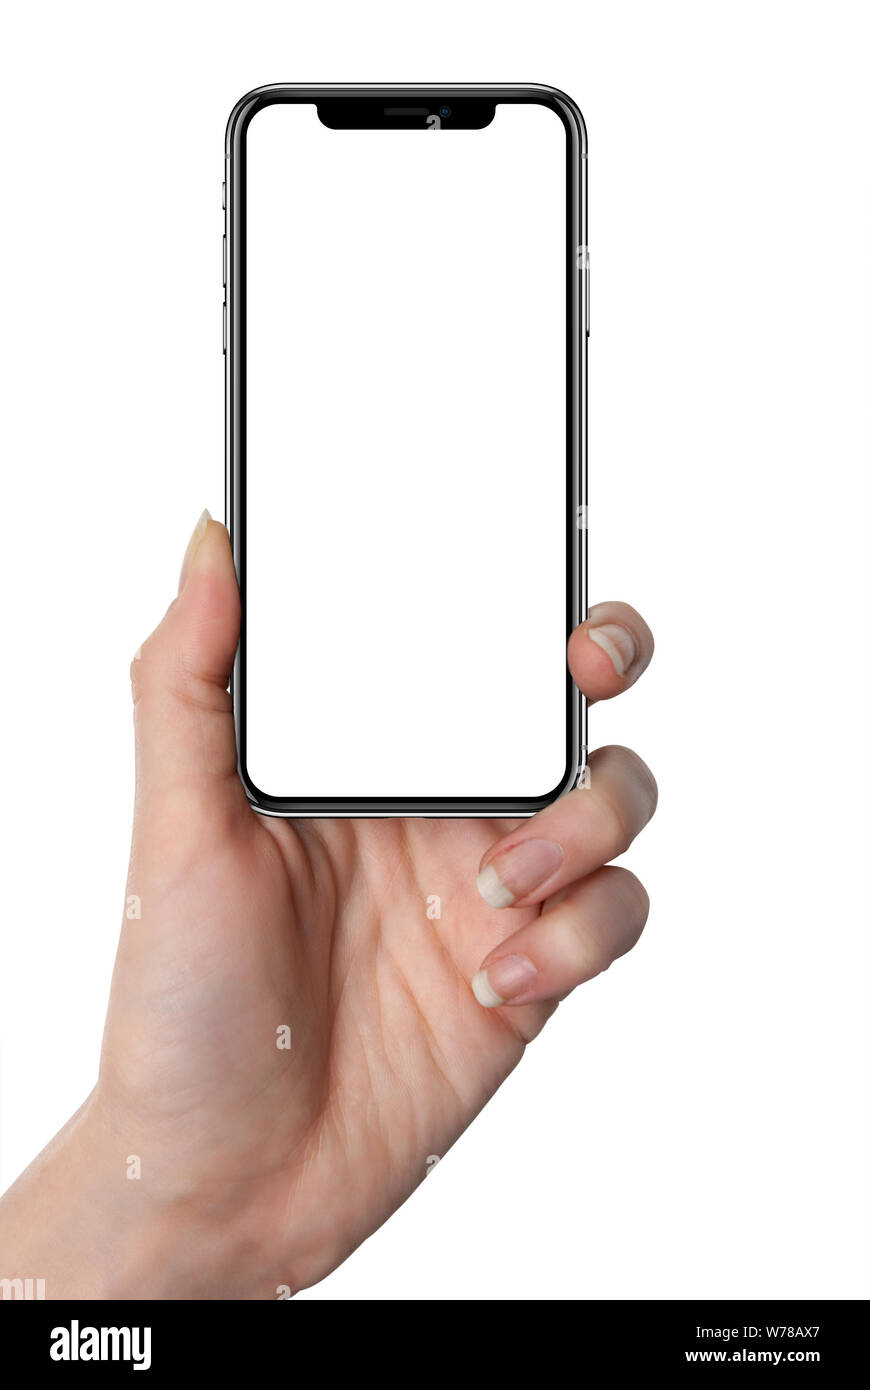 Woman hand holding the black smartphone similar to iphone x with blank screen and modern frame less design - isolated on white background Stock Photo